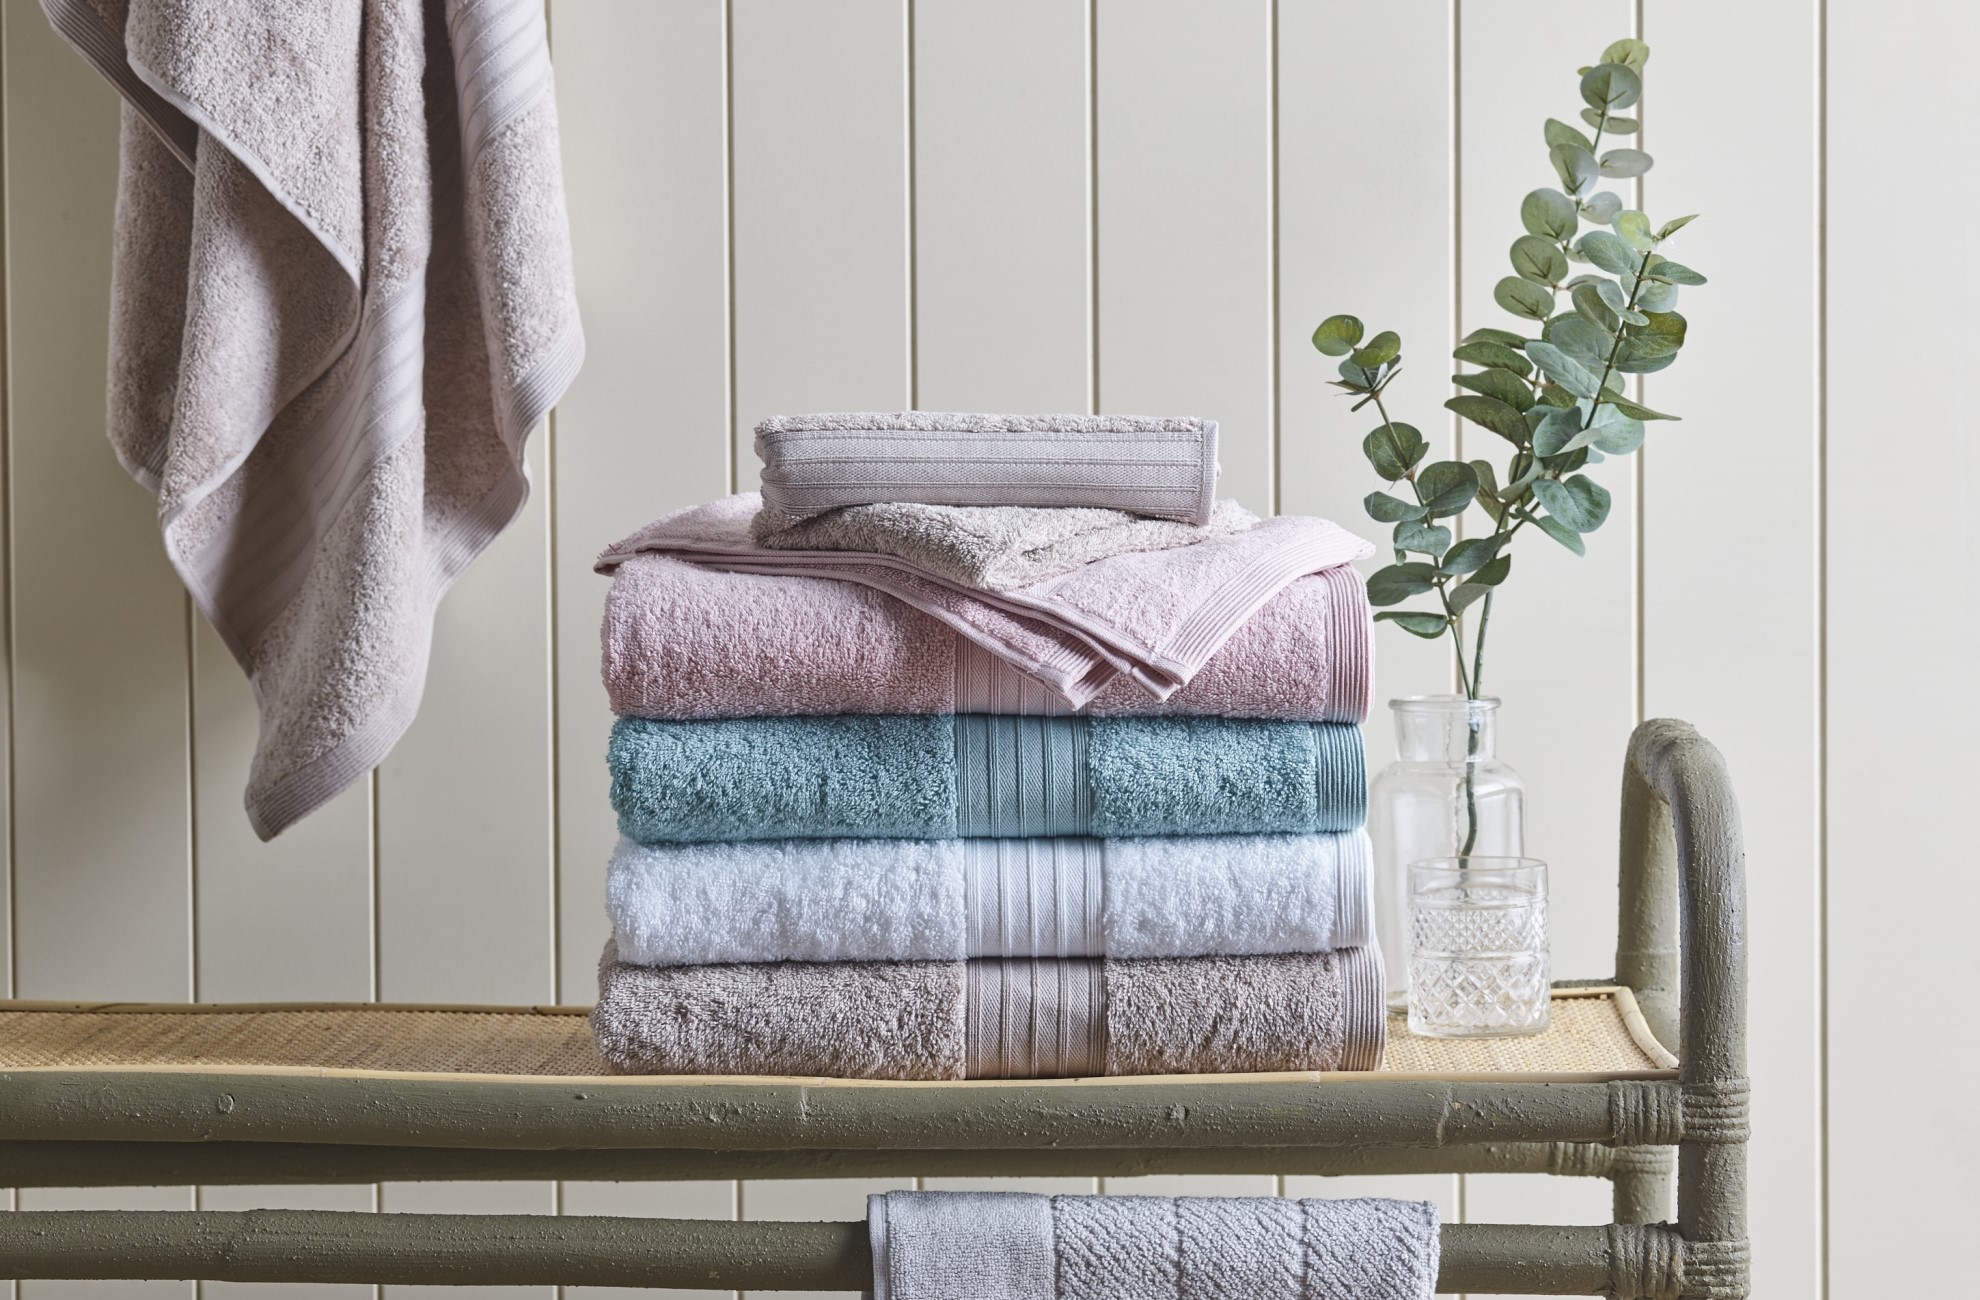 KOO Bath Towels folded and stacked on a bathroom bench